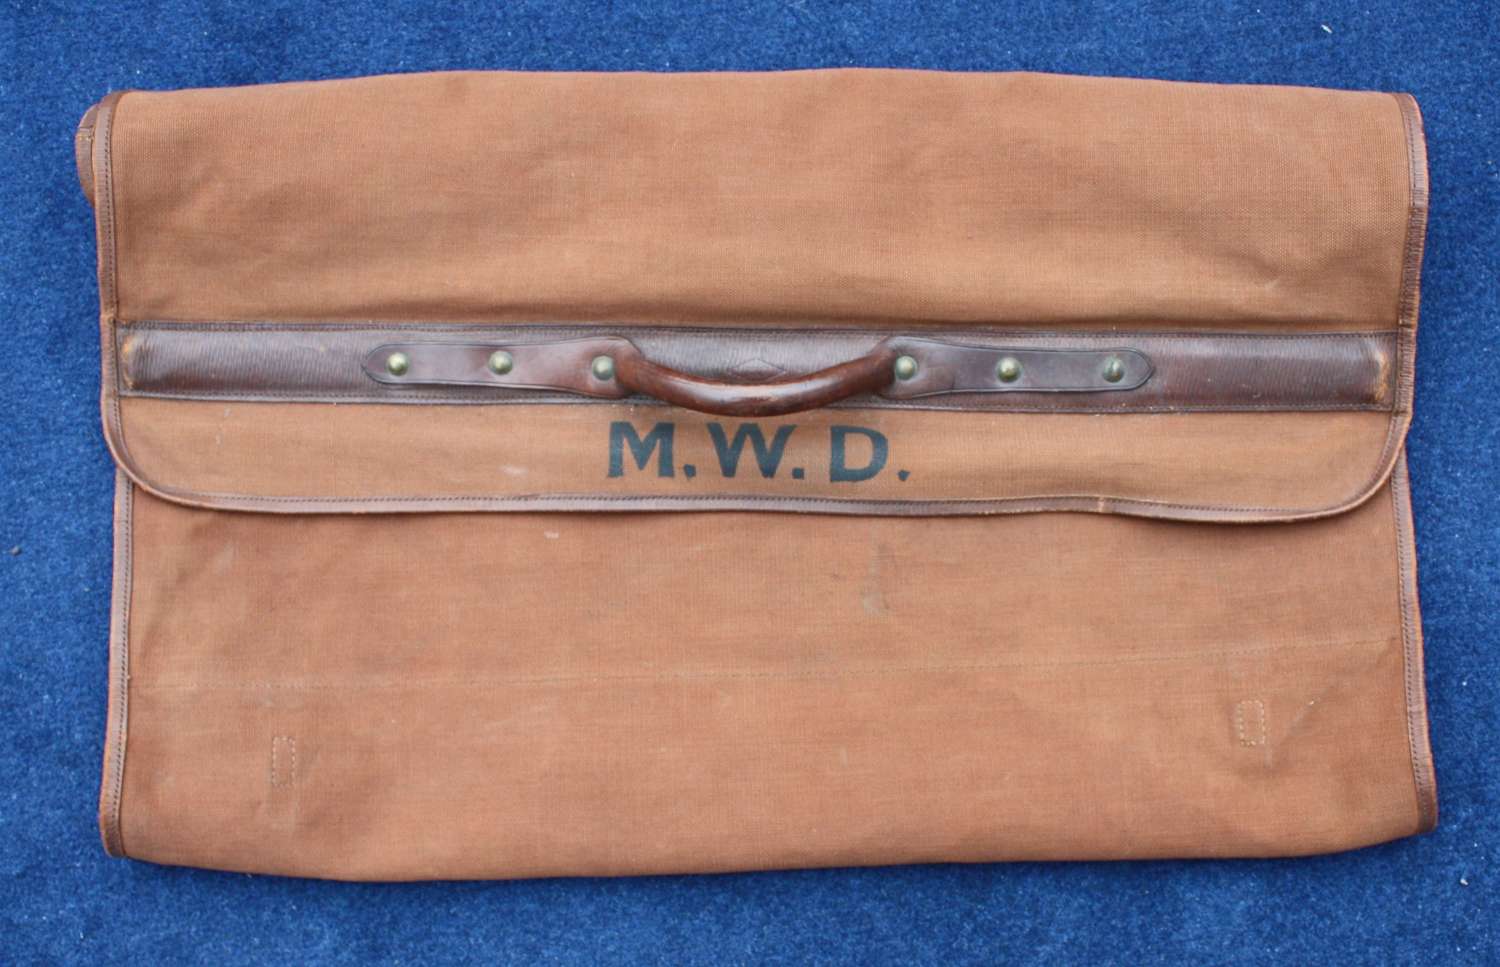 British Army WW1 Officers Valise Case in Very Good Condition.